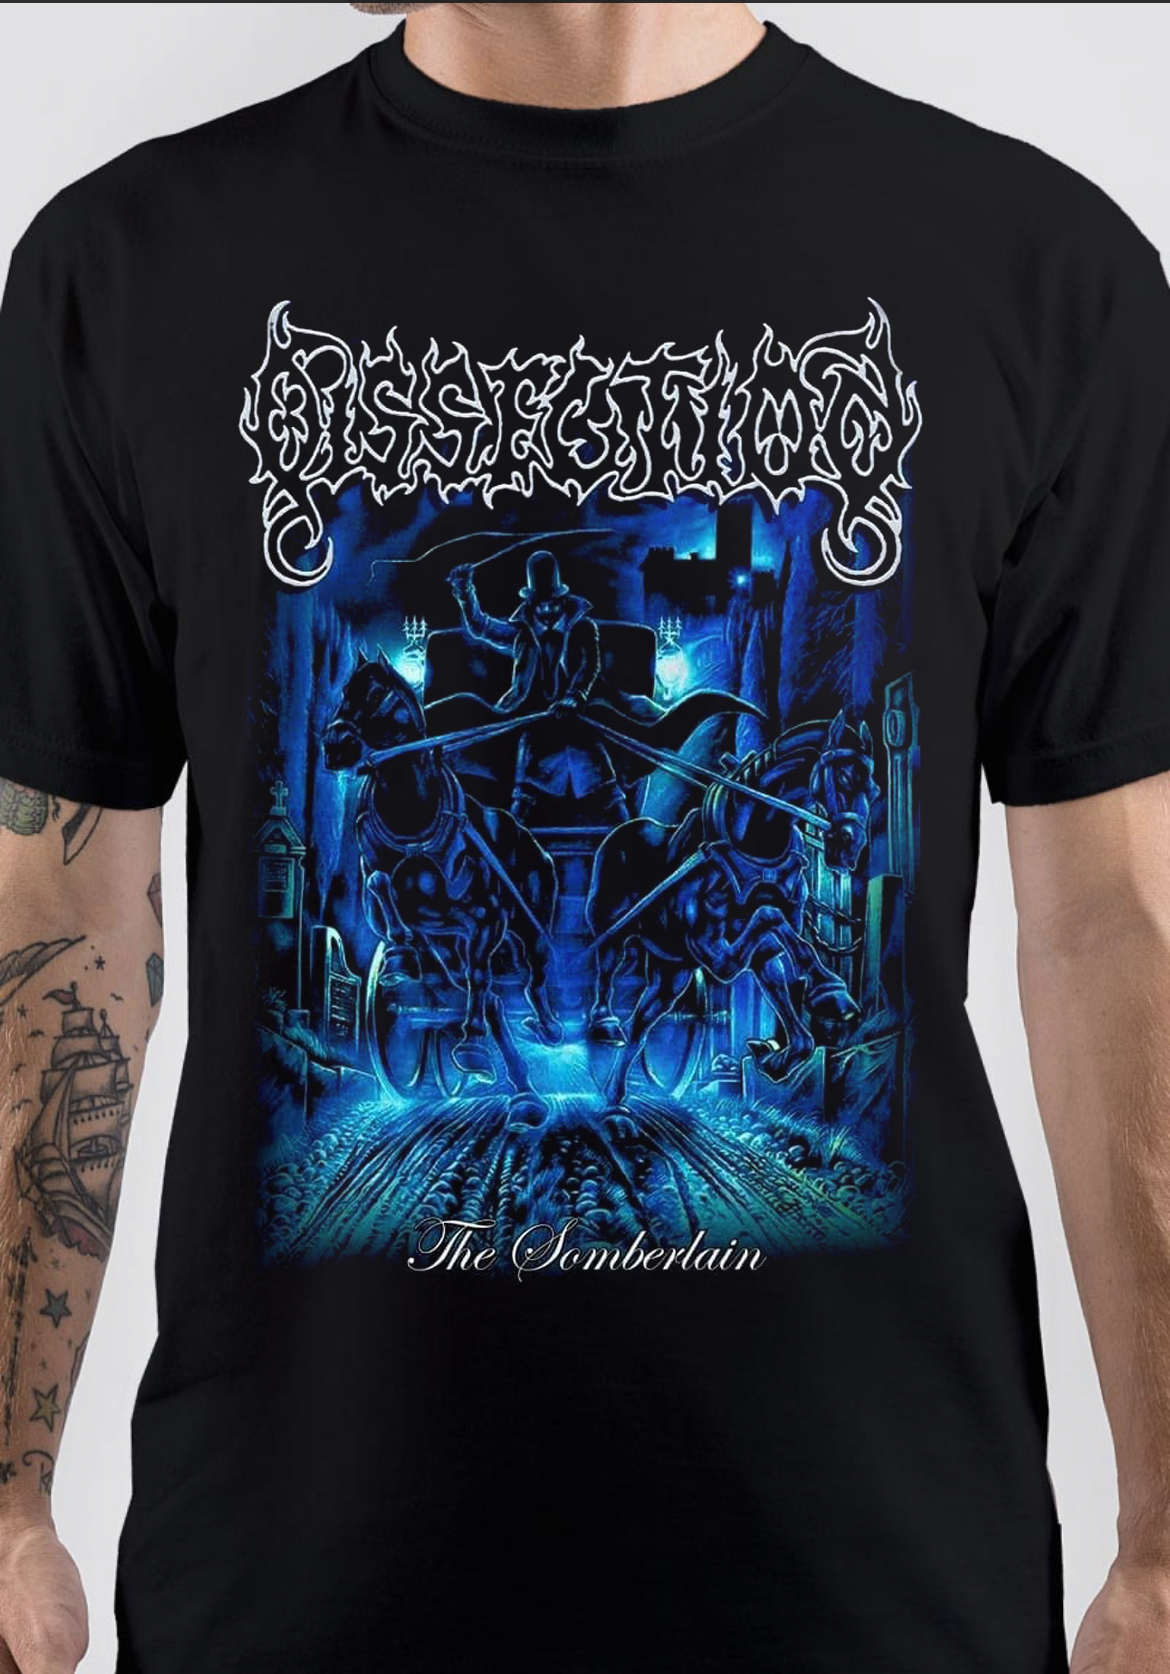 dissection band t shirts